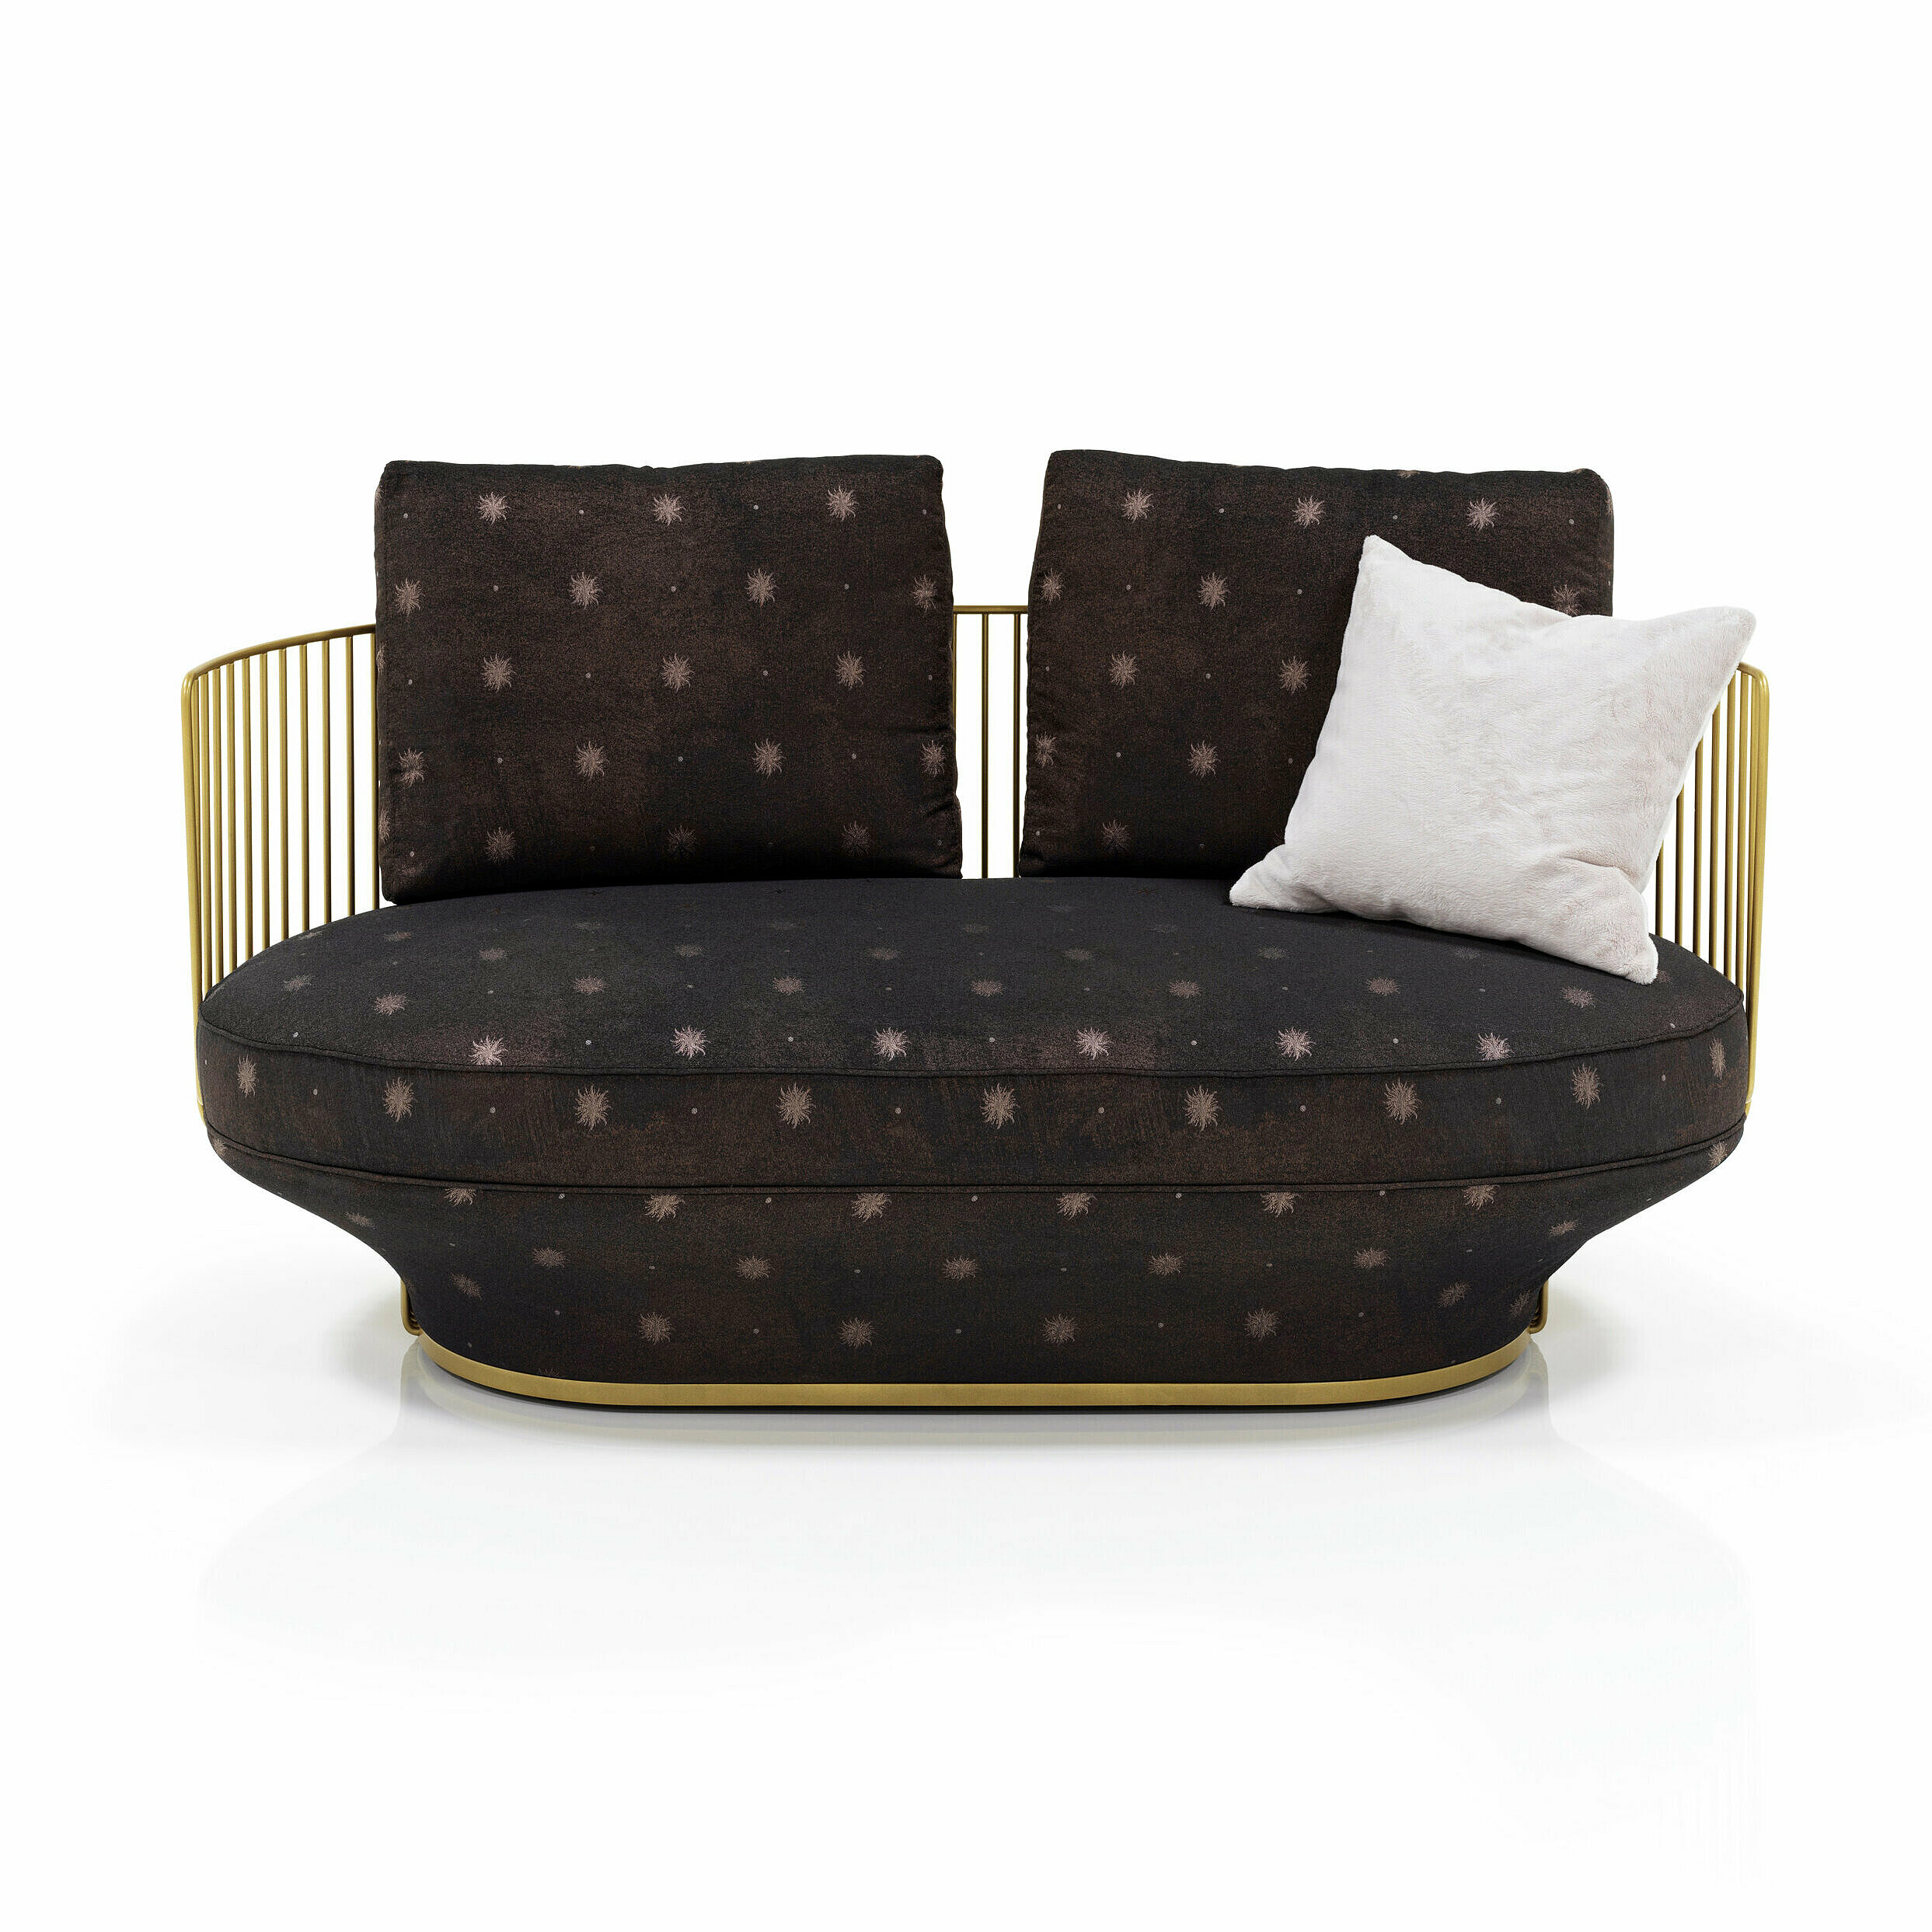 Two-seater sofa with metal frame and seat cushions covered with brown brocade with star pattern